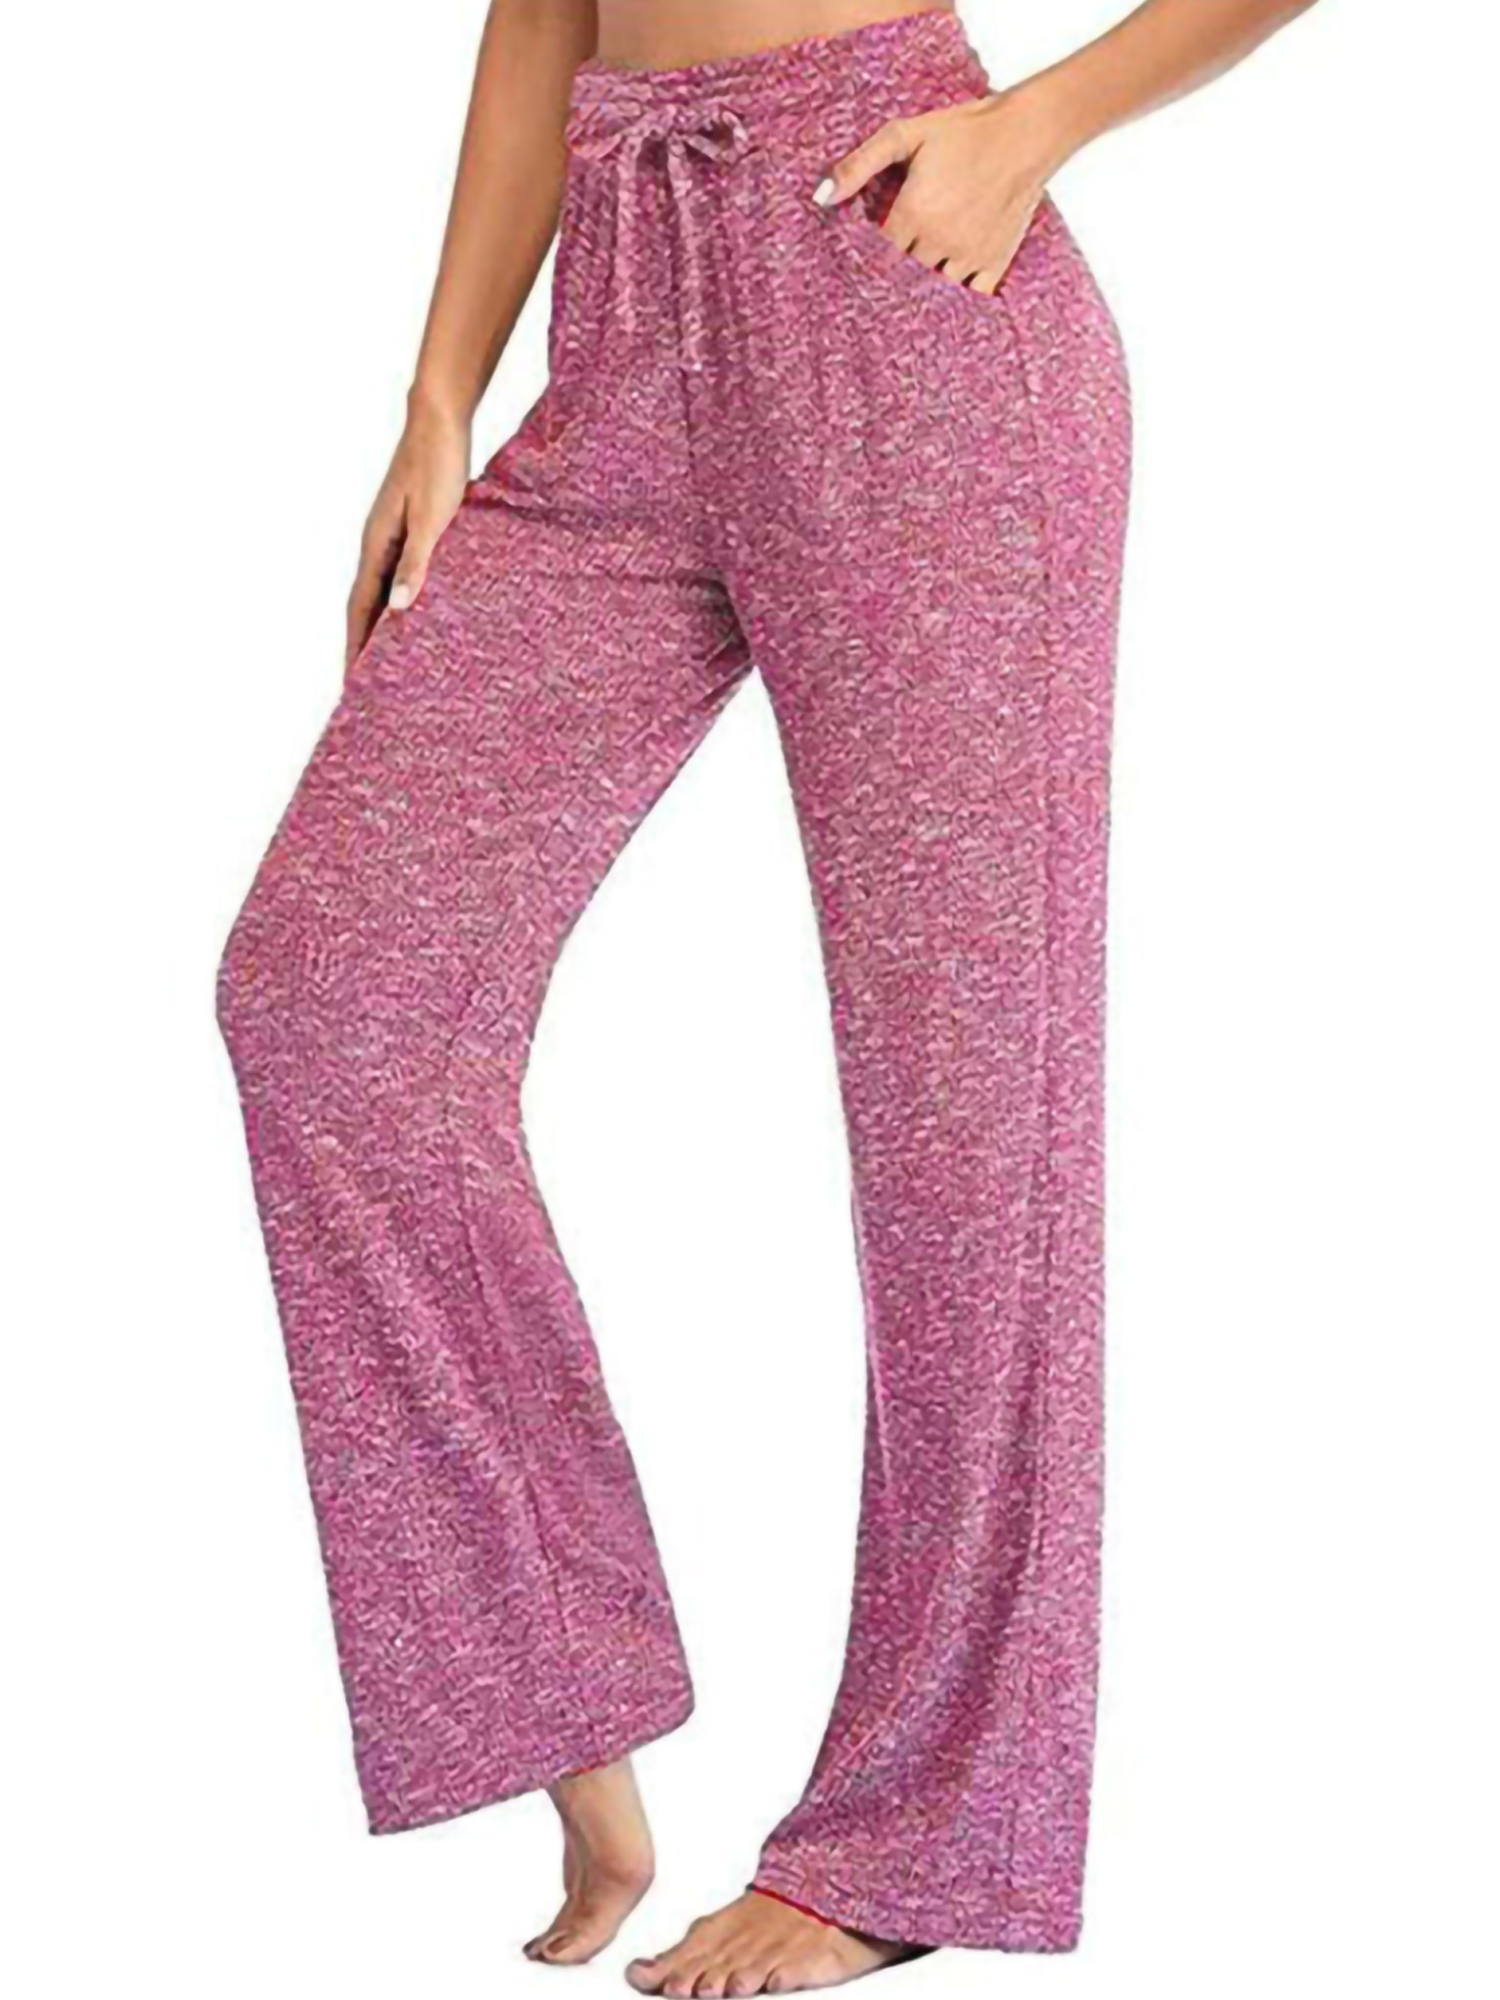 Sexy Dance Women Yoga Pants High Waisted Casual Sweatpant Elastic Waist Wide Leg Pant Plus Size Stretch Workout Pants Running Joggers Sportswear with Pockets - image 1 of 5